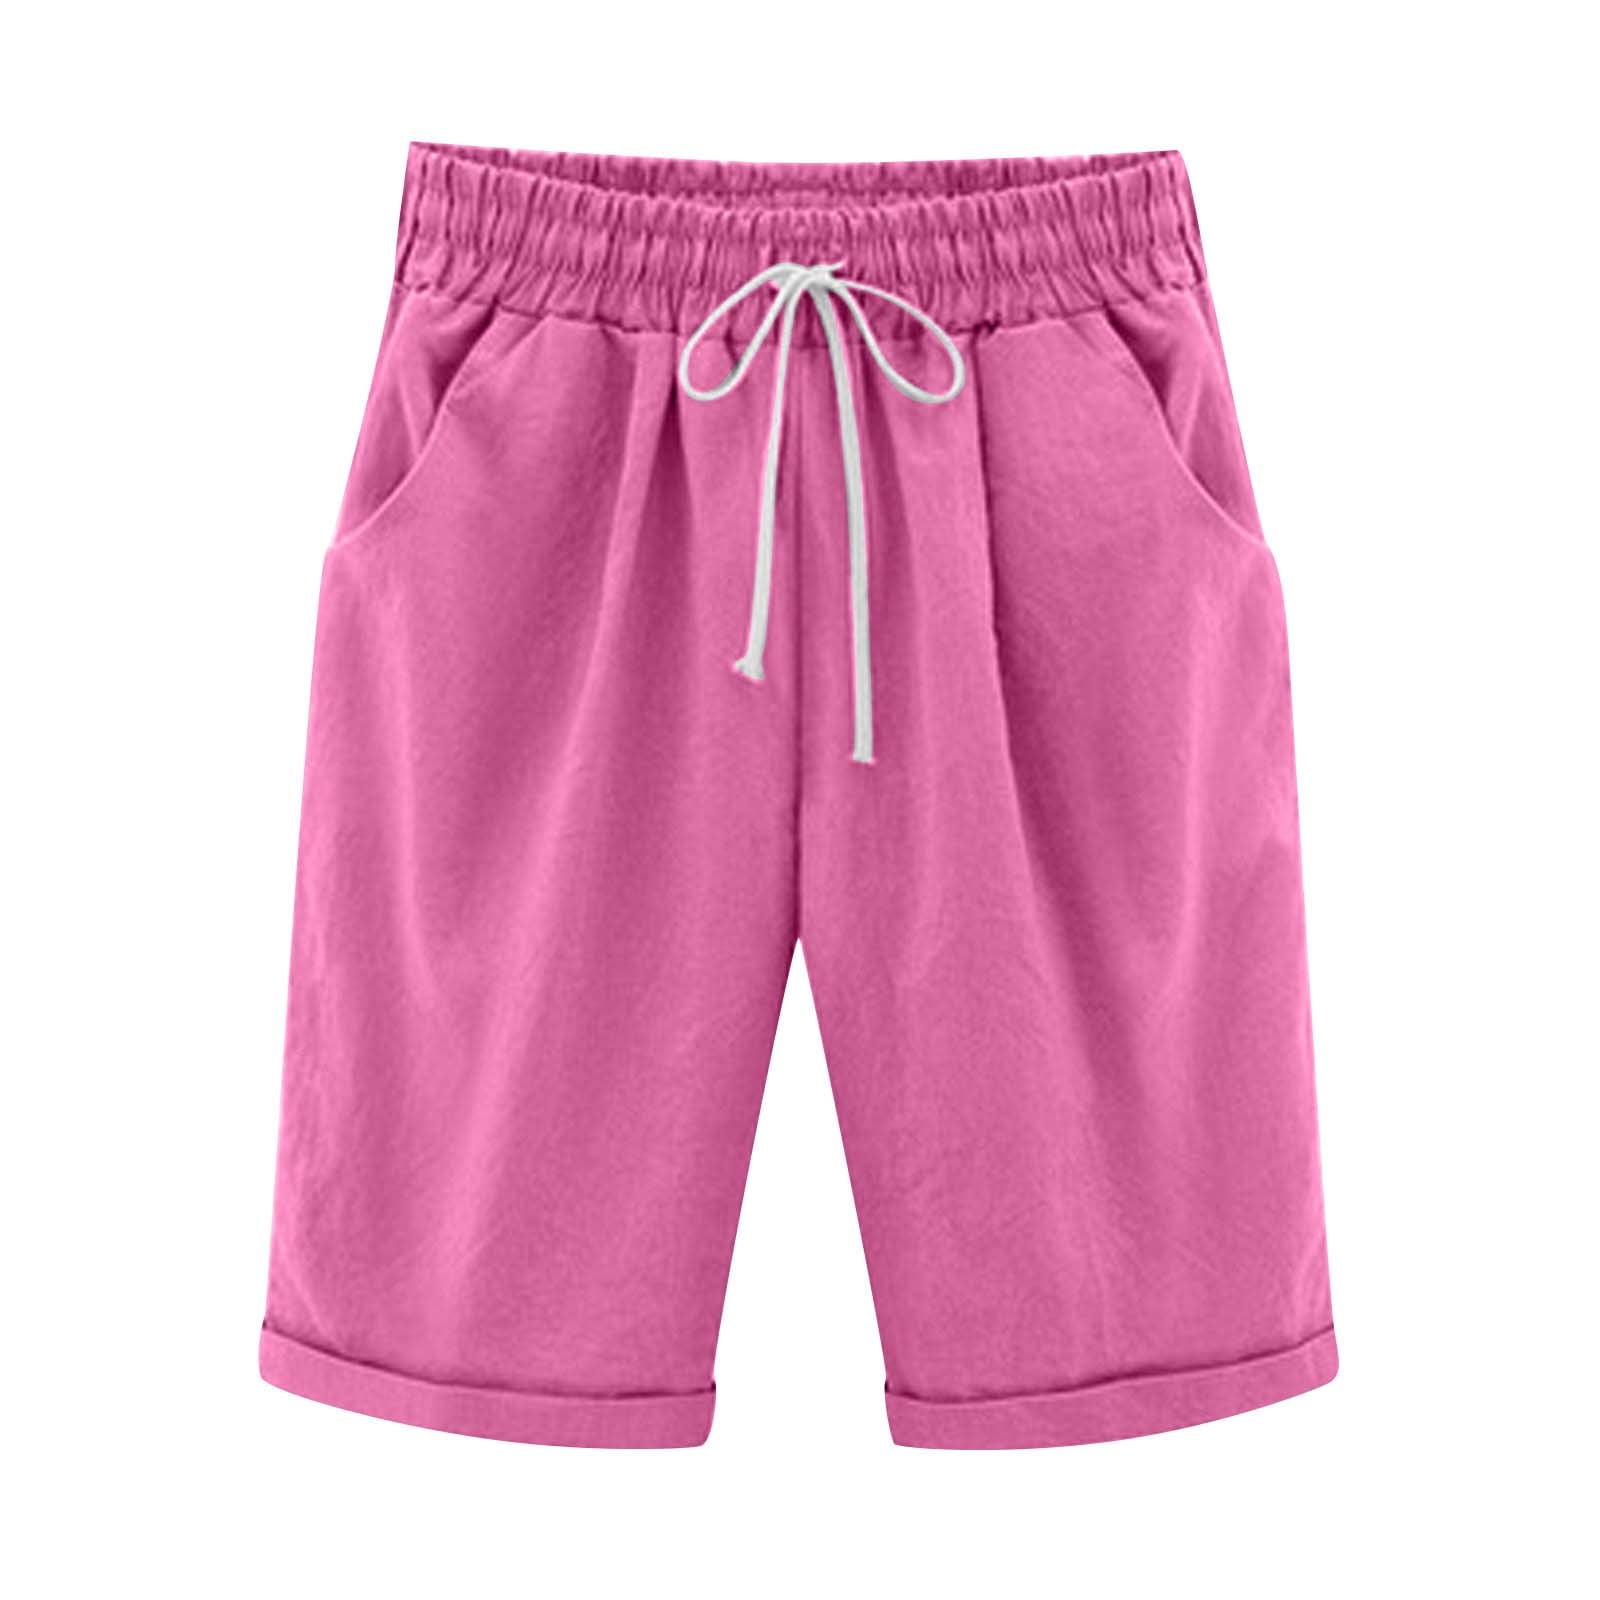 Top Rated Products in Women's Plus Shorts & Capris